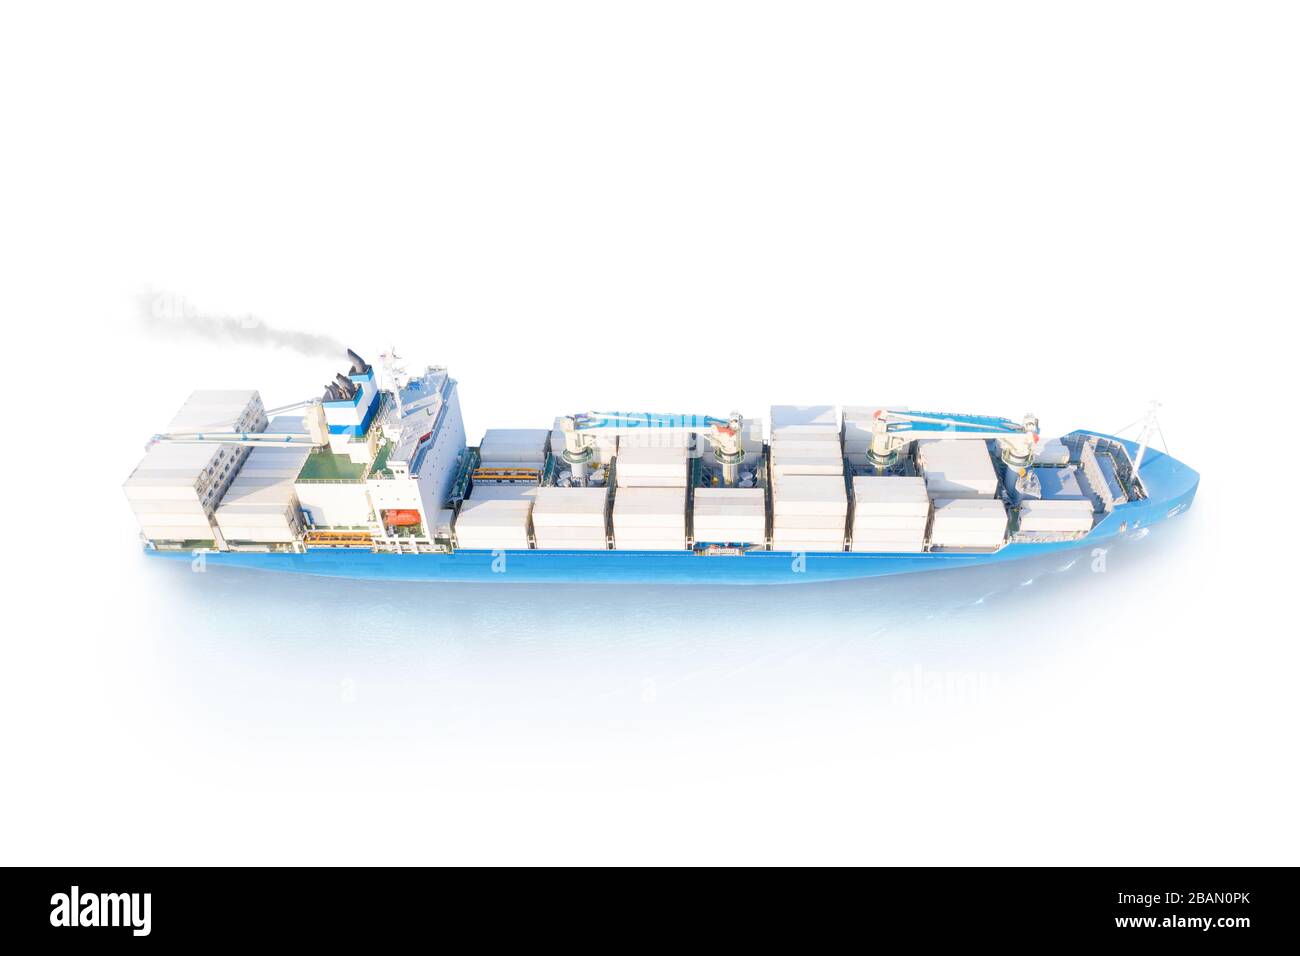 Large full loaded container ship with cranes sailing bright blue sea. Isolated on white, clipping path included Stock Photo